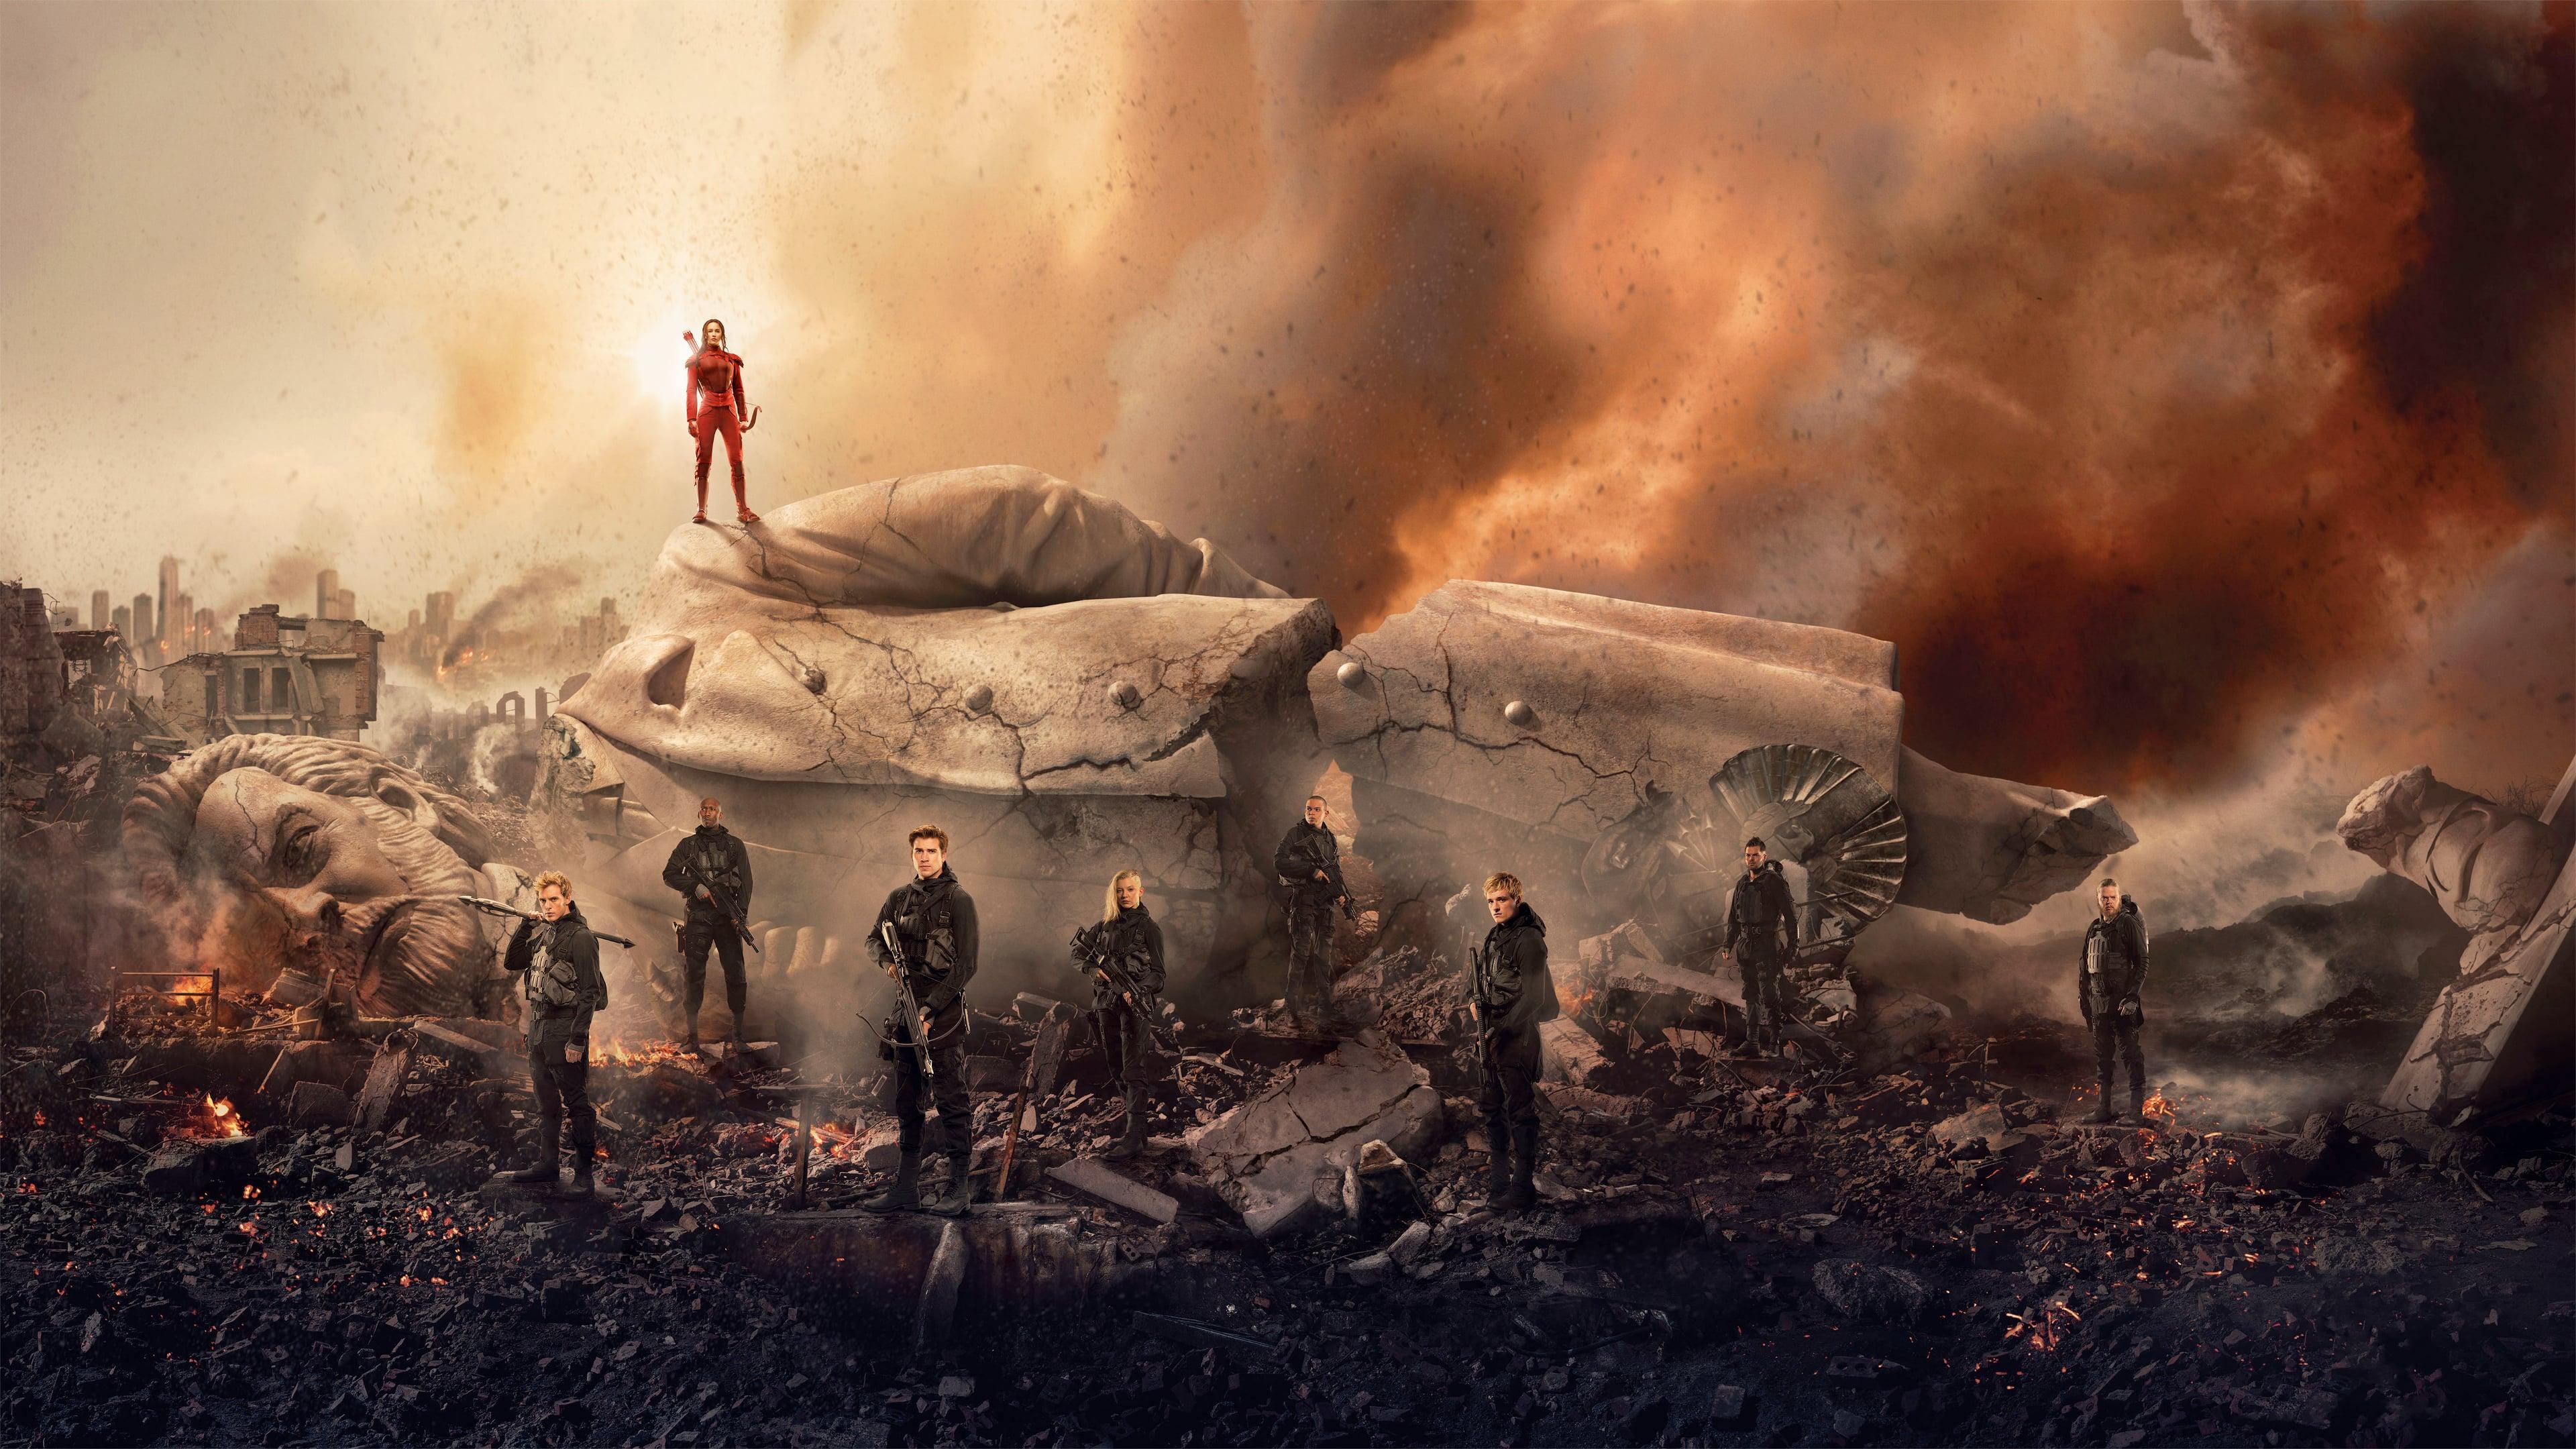 Enter Our The Hunger Games: Mockingjay - Part 1 and Win Free Stuff